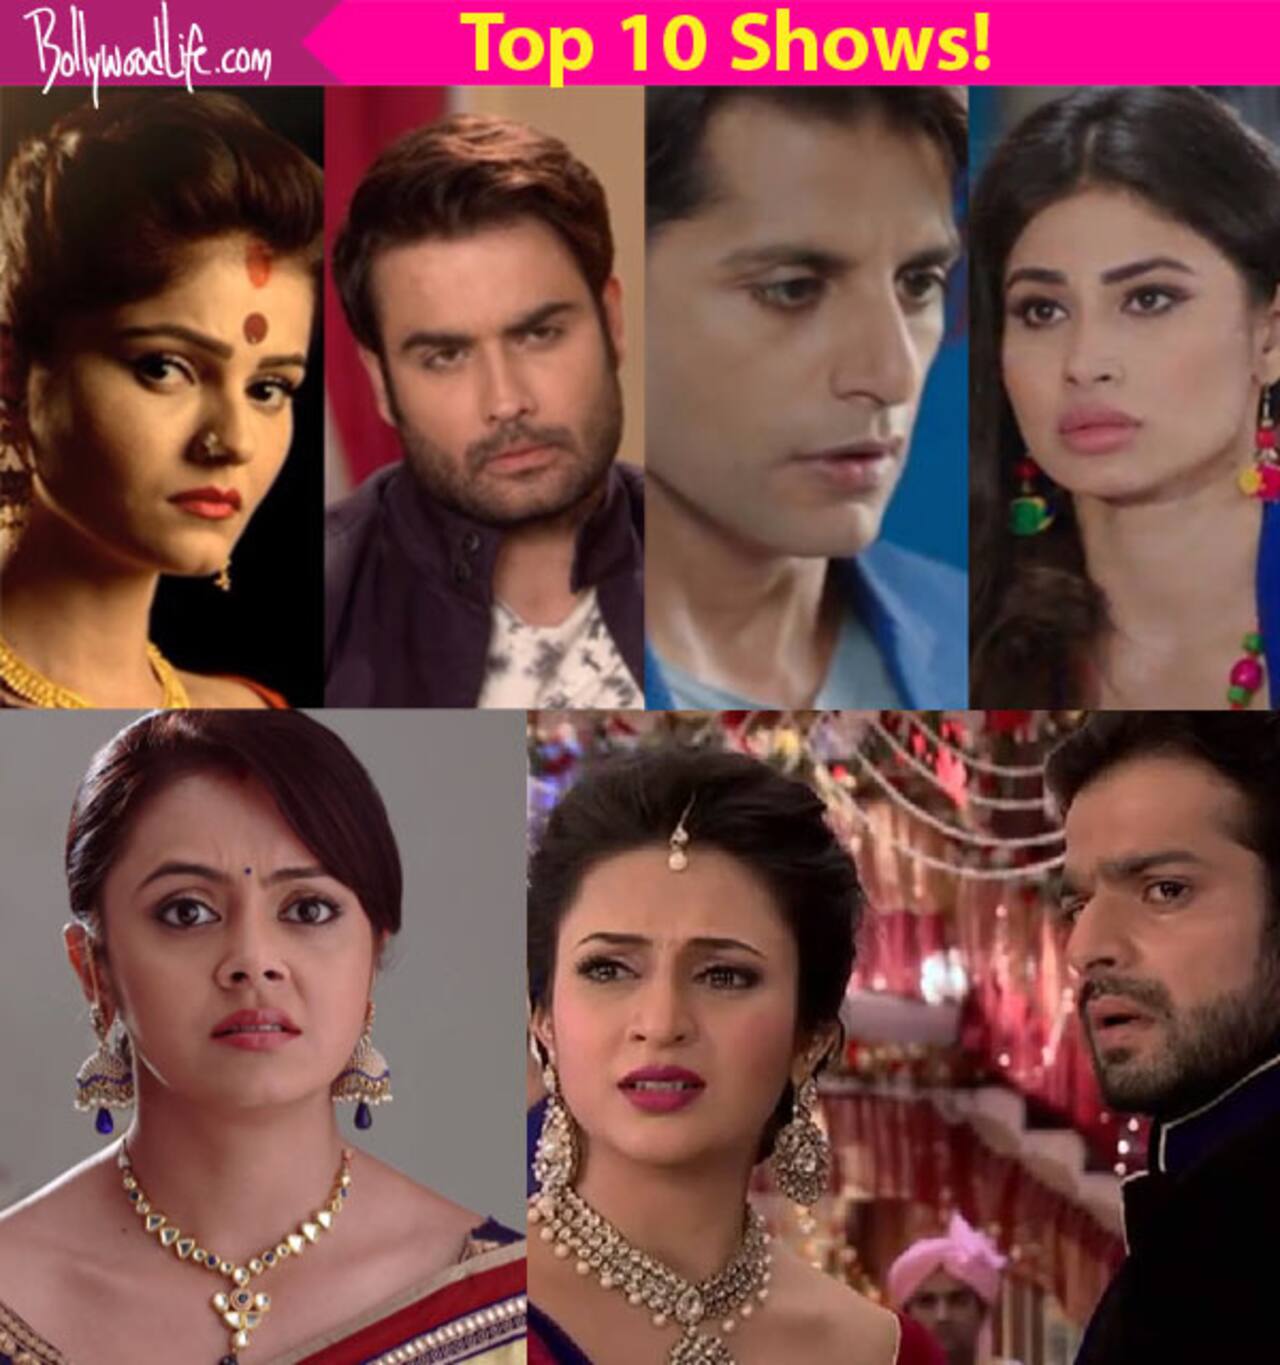 BARC Report: Naagin 2, Udaan, Yeh Hai Mohabbatein - here's a look at the Top 10 TV shows